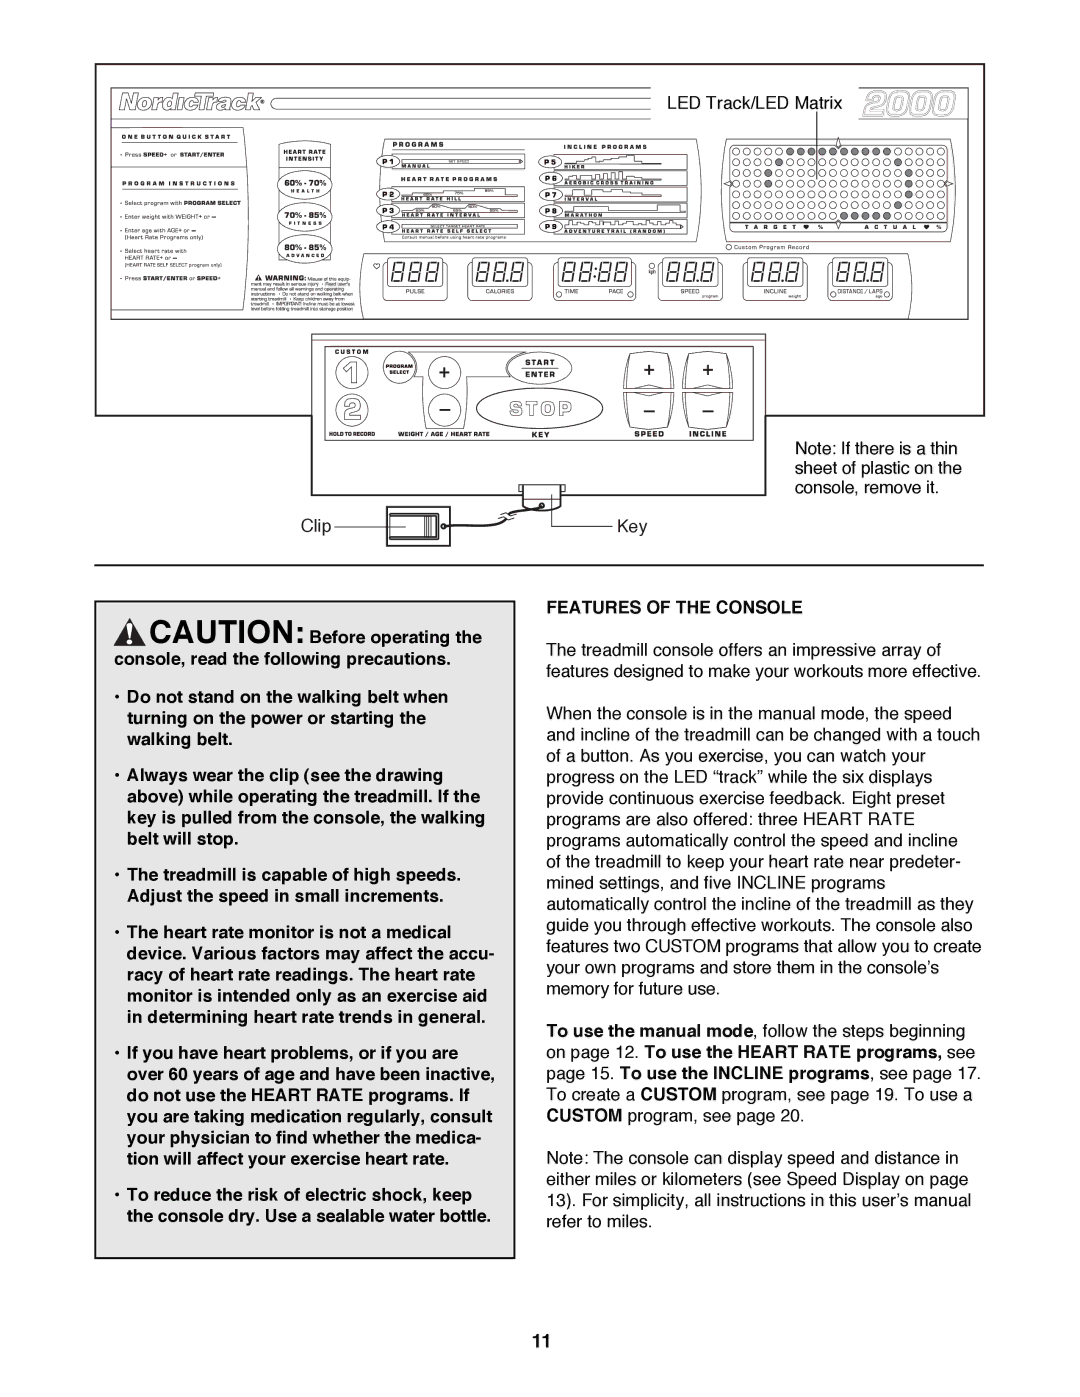 NordicTrack NTTL15083 manual Features of the Console 